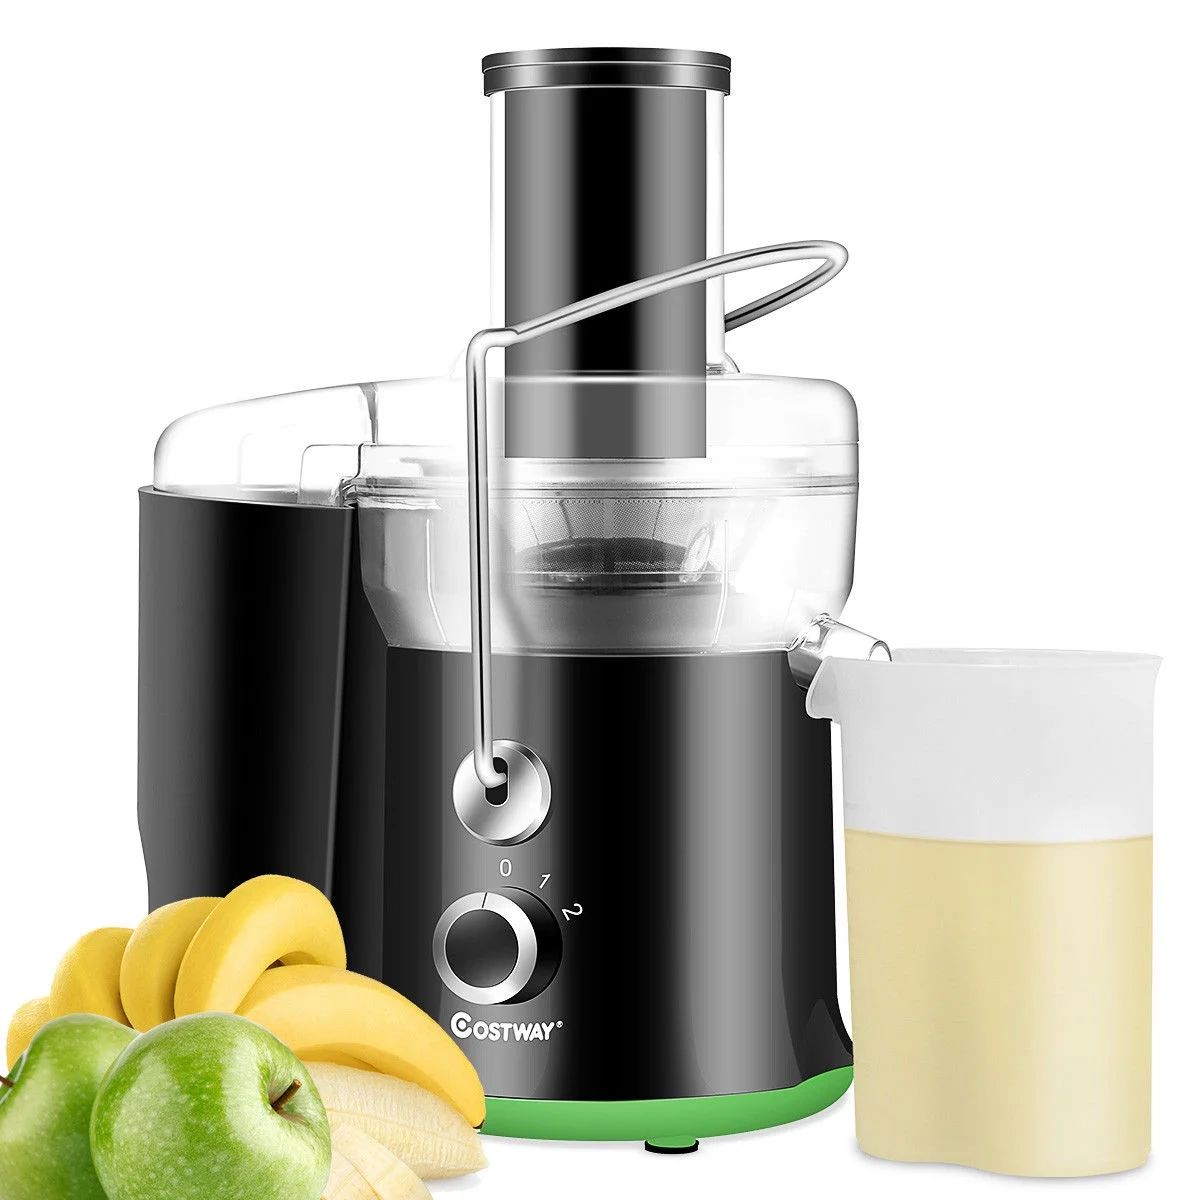 Costway Electric Juicer Wide Mouth Fruit & Vegetable Centrifugal Juice Extractor 2 Speed | Walmart (US)